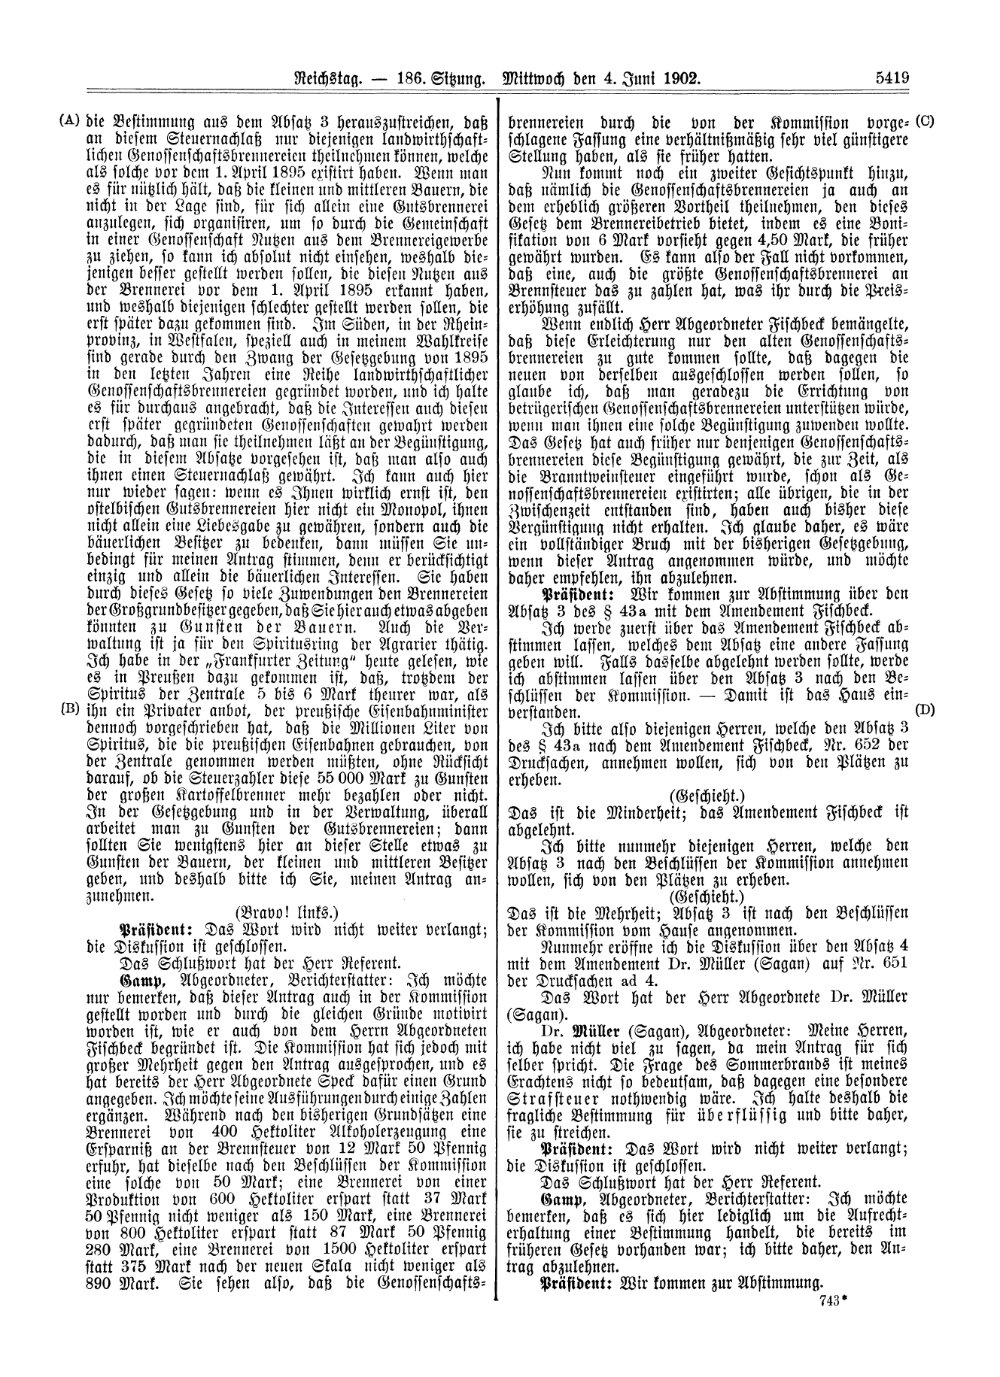 Scan of page 5419